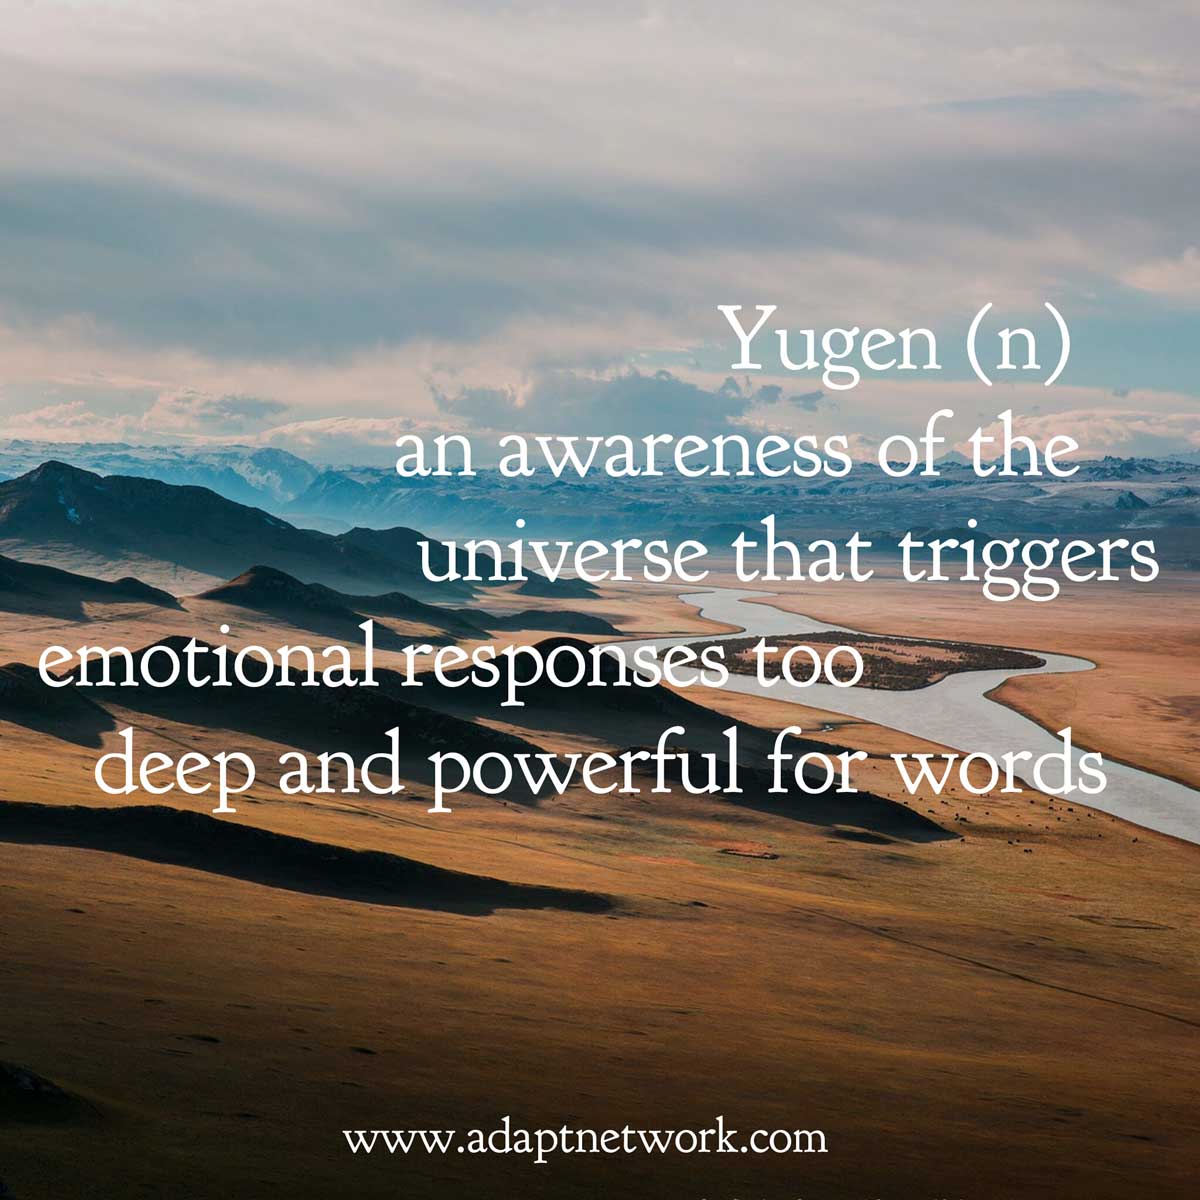 "Yugen - an awareness of the universe that triggers 